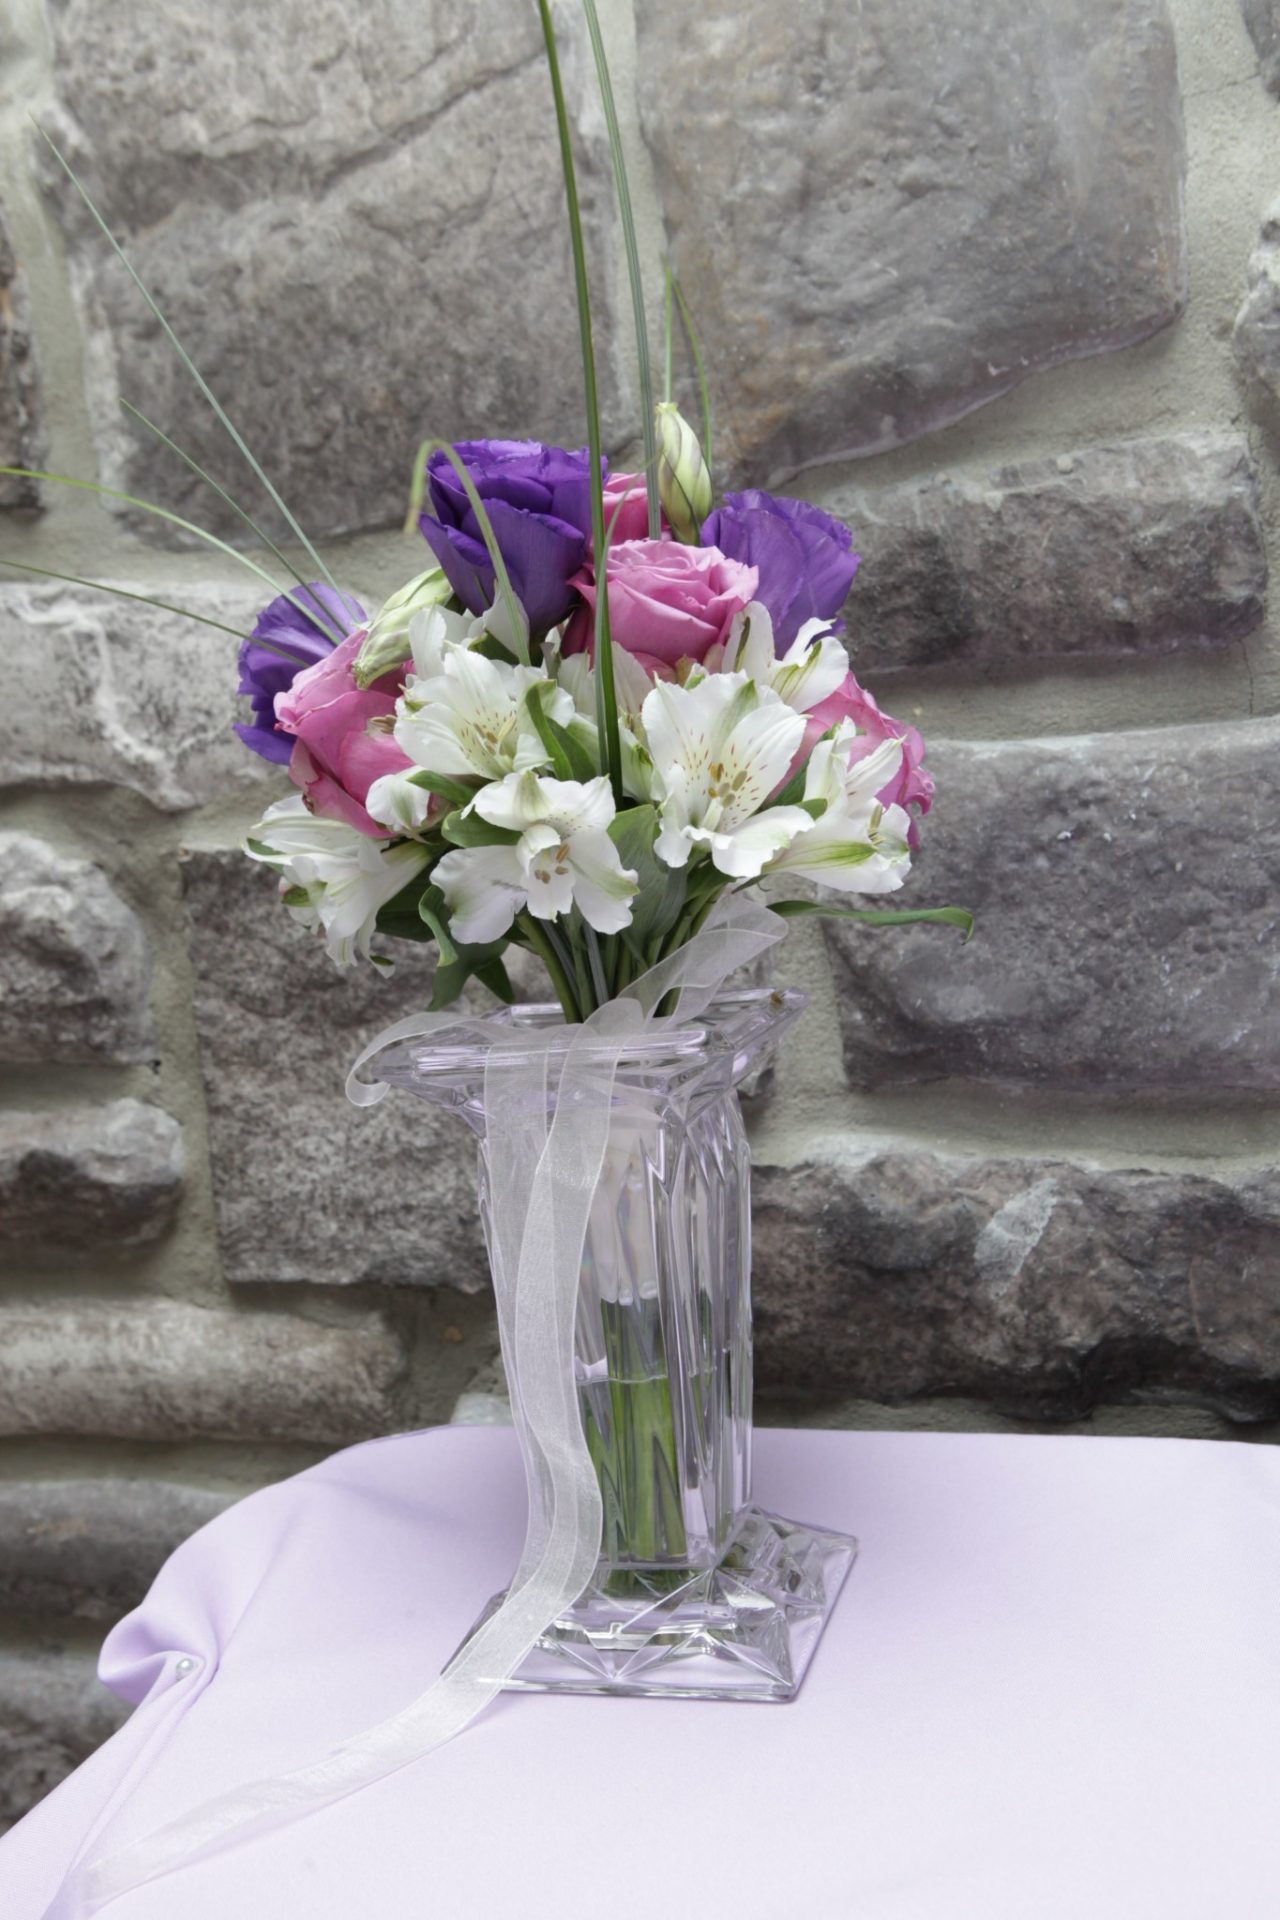 Bride and groom chose pink, purple, and white color scheme as seen in this floral arrangement used as table centerpiece.